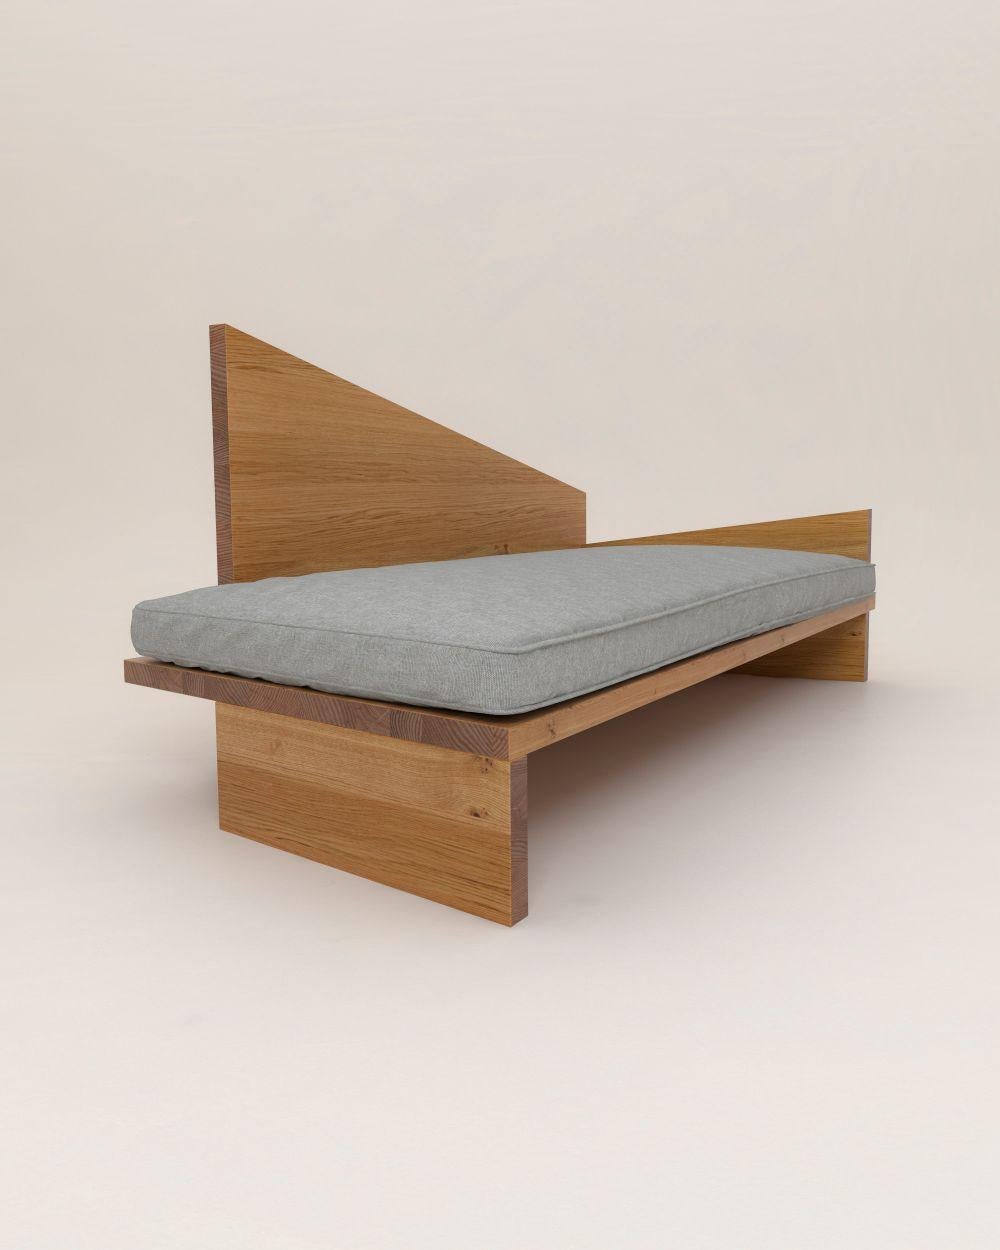 Crooked daybed by Nazara Lazaro
Dimensions: H 84 cm x W 208 cm x D 91 cm
Materials: Massive oak with oil wax surface

Also available in natural massive oak, walnut, and white lacquered wood.

The Crooked Collection is an ongoing series of